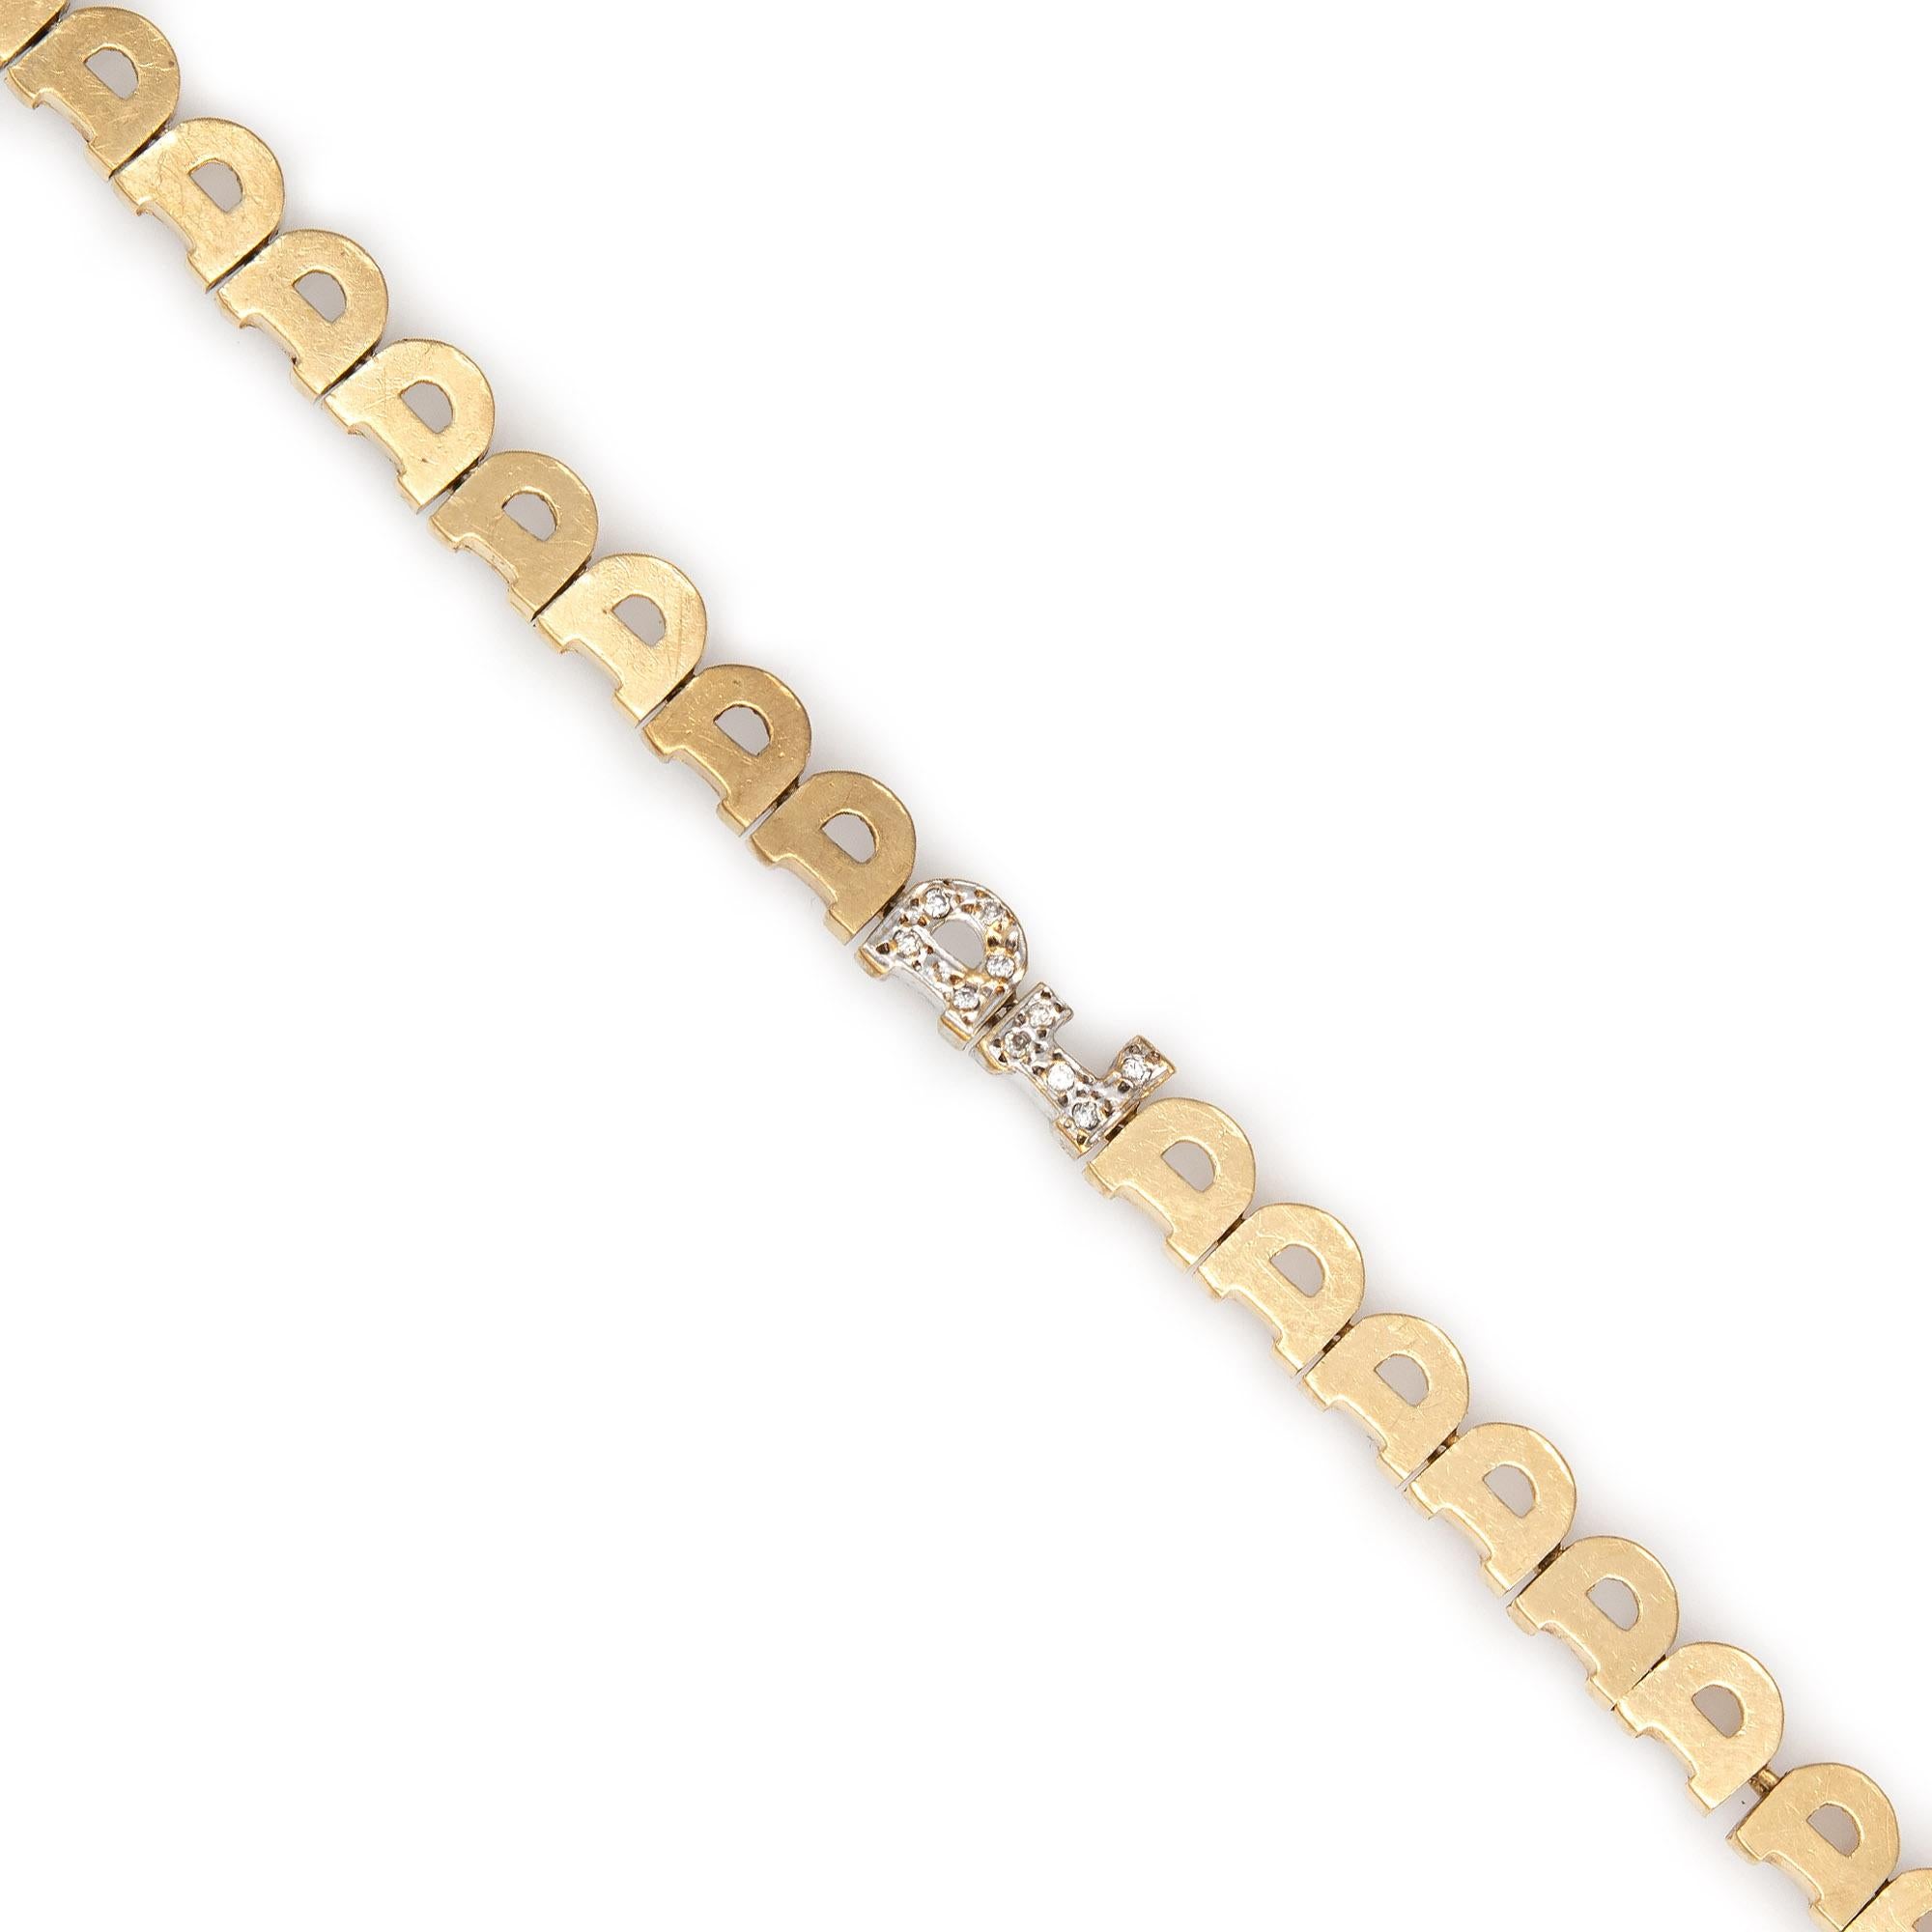 Stylish and finely detailed vintage letter 'D' diamond bracelet (circa 1970s to 1980s) crafted in 14k yellow gold. 

Diamonds total an estimated 0.11 carats (estimated at H-I color and SI1 clarity).   

The bracelet makes a great statement on the